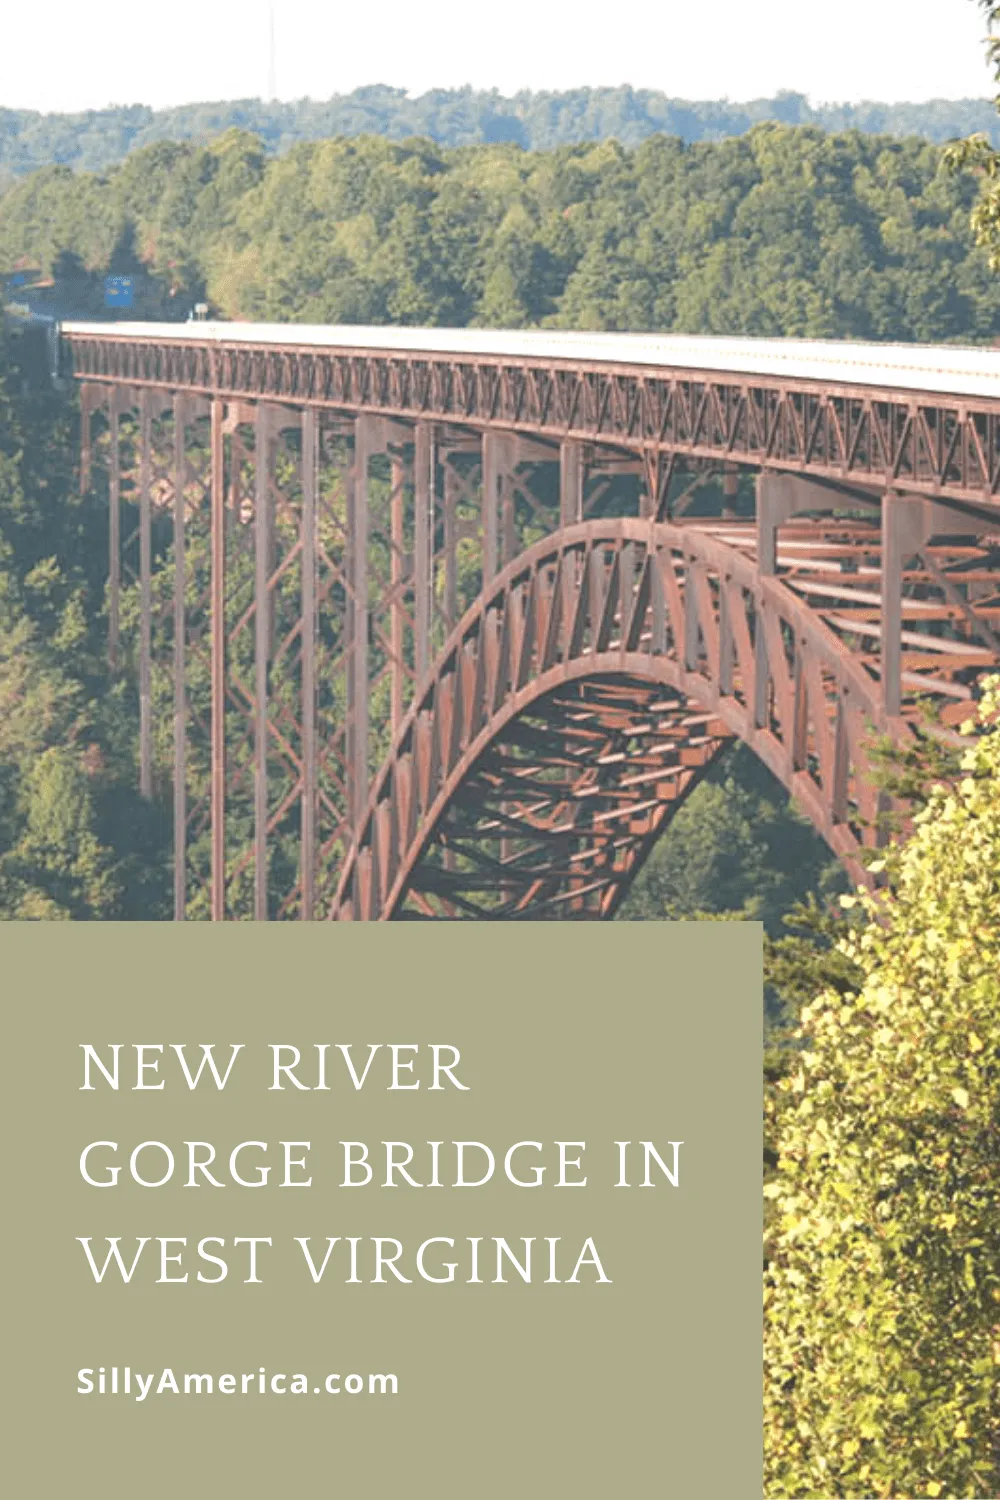 A must-see tourist attraction in West Virginia is the New River Gorge Bridge. While this road trip stop is far from the normal "world's largest things" we write about here, it's an impressive site and not to be missed if driving through the area. #WestVirginiaRoadsideAttractions #WestVirginiaRoadsideAttraction #RoadsideAttractions #RoadsideAttraction #RoadTrip #WestVirginiaRoadTrip #WestVirginiaTravelRoadTrip #ThingsToDoInWestVirginia #WestVirginiaMountainsRoadTrip 